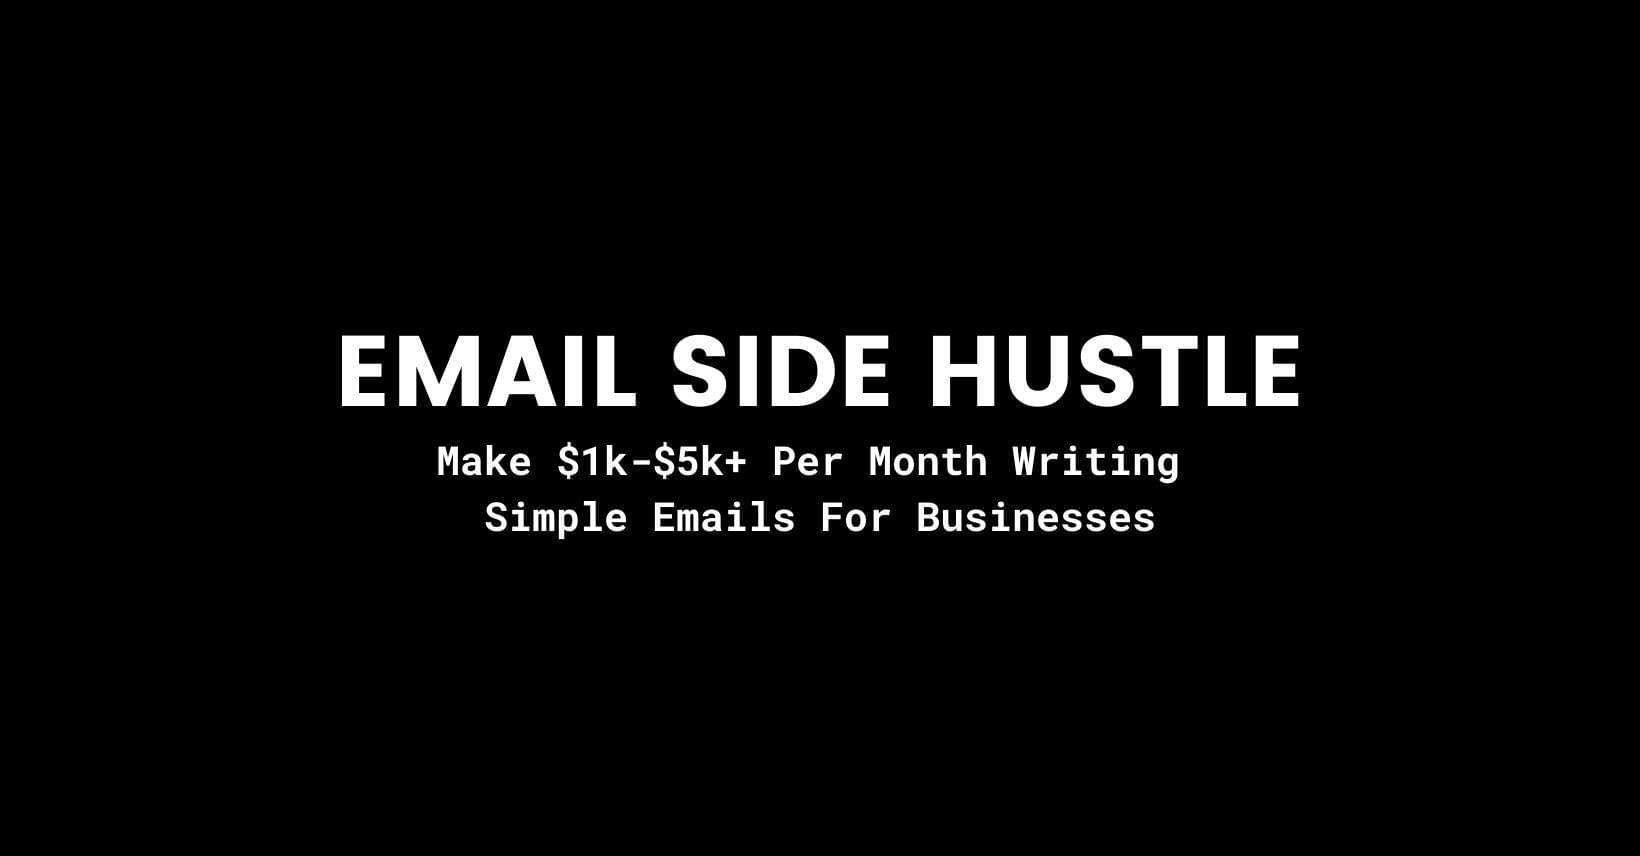 Email Side Hustle By Sean Anthony